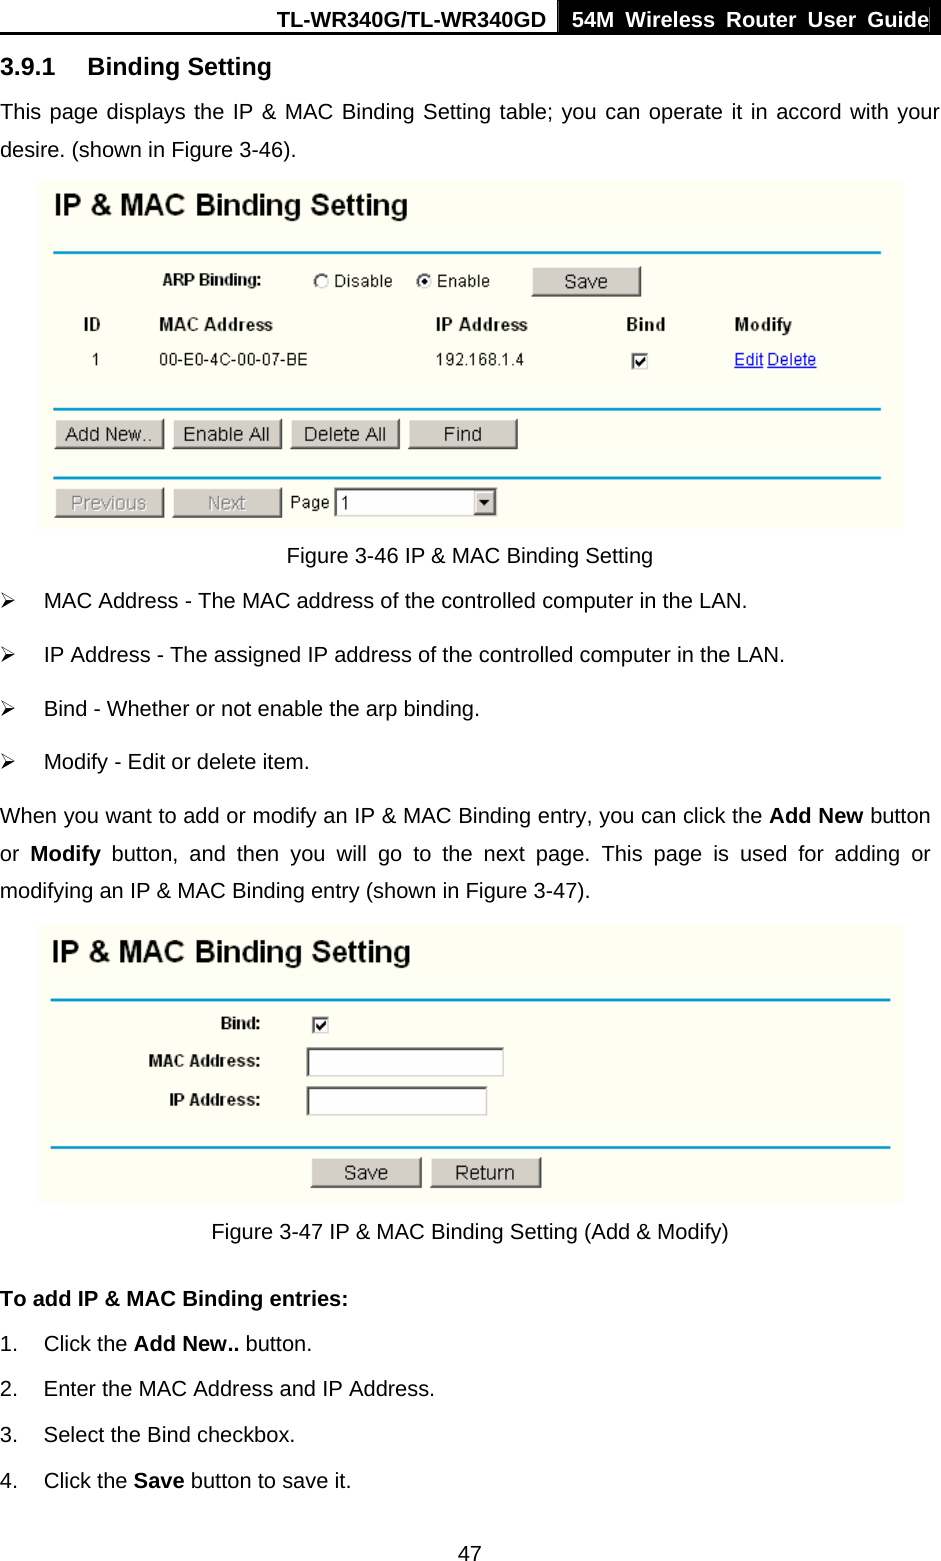 TL-WR340G/TL-WR340GD 54M Wireless Router User Guide  473.9.1 Binding Setting This page displays the IP &amp; MAC Binding Setting table; you can operate it in accord with your desire. (shown in Figure 3-46).    Figure 3-46 IP &amp; MAC Binding Setting ¾  MAC Address - The MAC address of the controlled computer in the LAN. ¾  IP Address - The assigned IP address of the controlled computer in the LAN. ¾  Bind - Whether or not enable the arp binding. ¾  Modify - Edit or delete item. When you want to add or modify an IP &amp; MAC Binding entry, you can click the Add New button or  Modify button, and then you will go to the next page. This page is used for adding or modifying an IP &amp; MAC Binding entry (shown in Figure 3-47).      Figure 3-47 IP &amp; MAC Binding Setting (Add &amp; Modify) To add IP &amp; MAC Binding entries: 1. Click the Add New.. button.   2.  Enter the MAC Address and IP Address. 3.  Select the Bind checkbox.   4. Click the Save button to save it. 